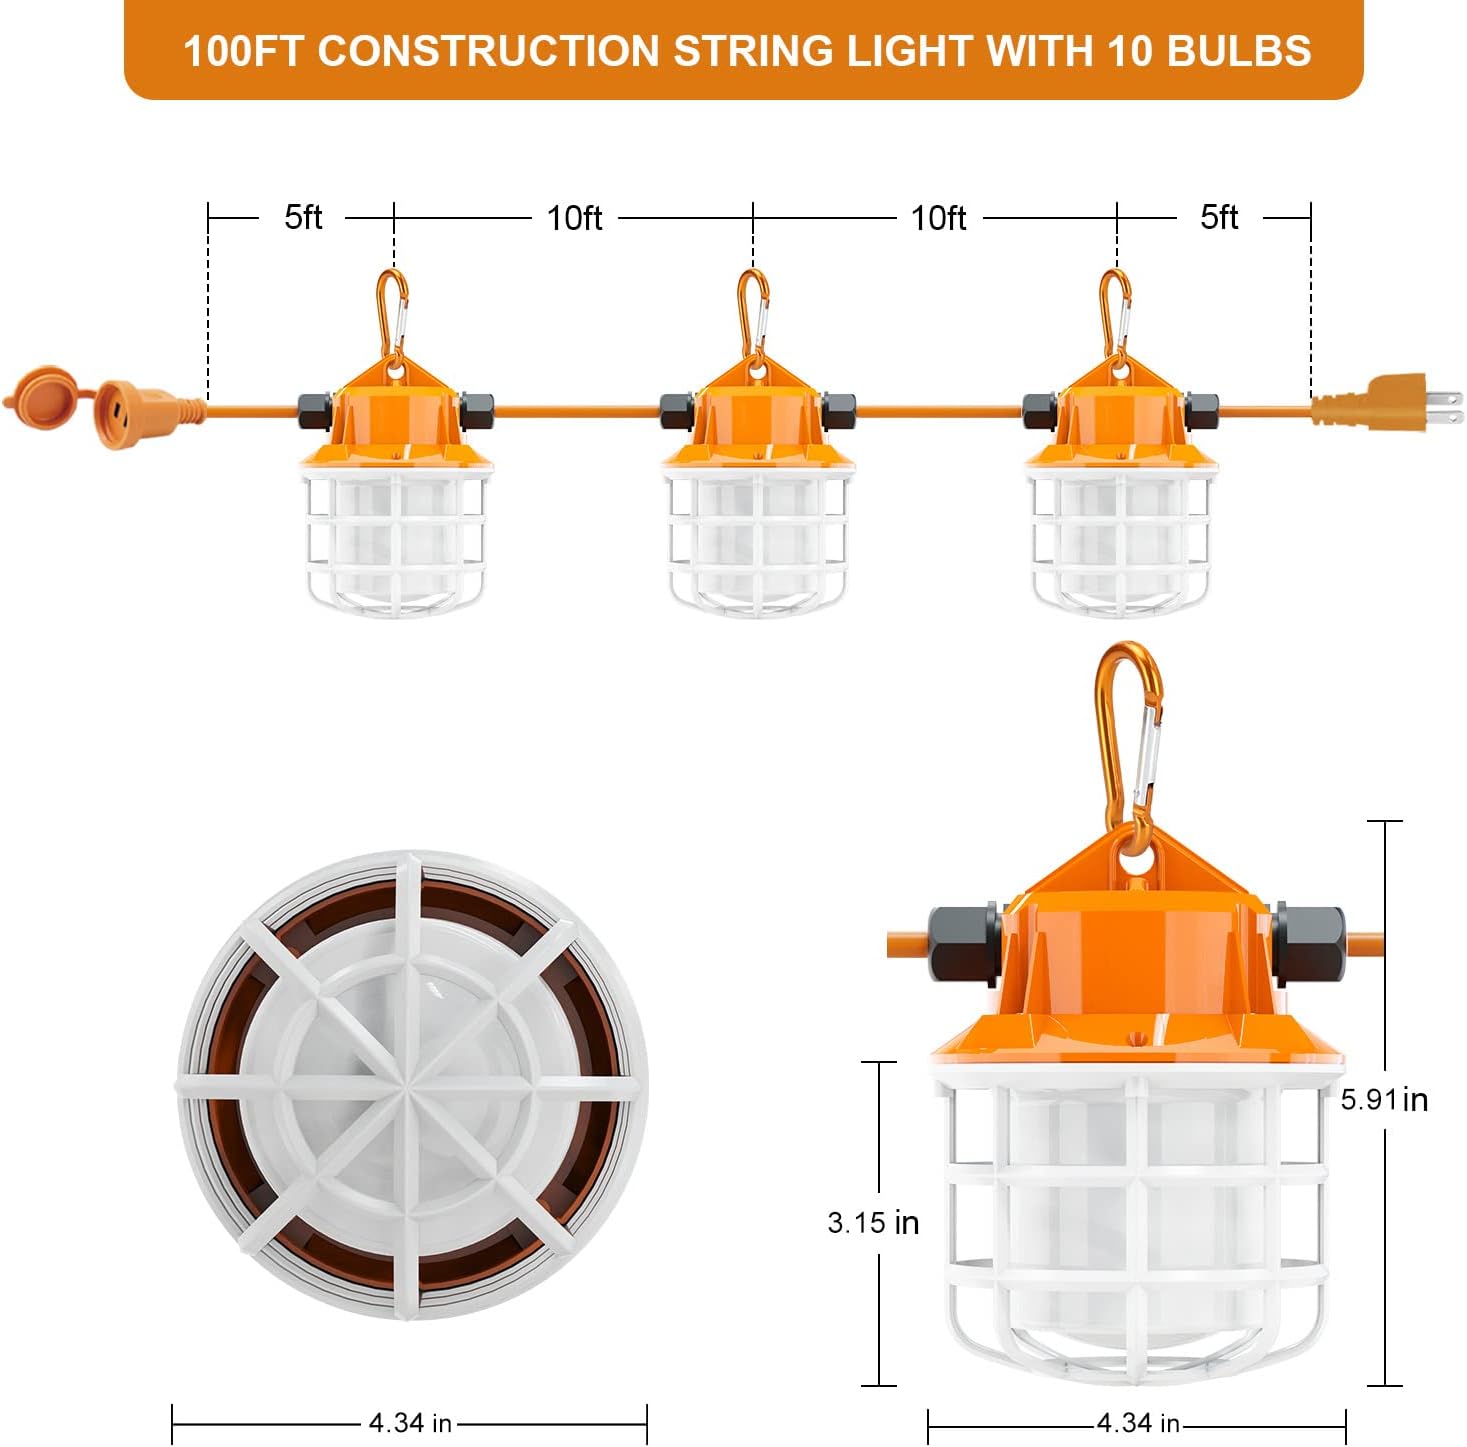 NS 100FT Construction String Lights 150W LED Industrial Grade 15000LM Super Bright for Construction Sites, Temporary Work, Renovation, Jobsite,and All Outdoor Lighting, with 10 Bulbs and Climbing Hook